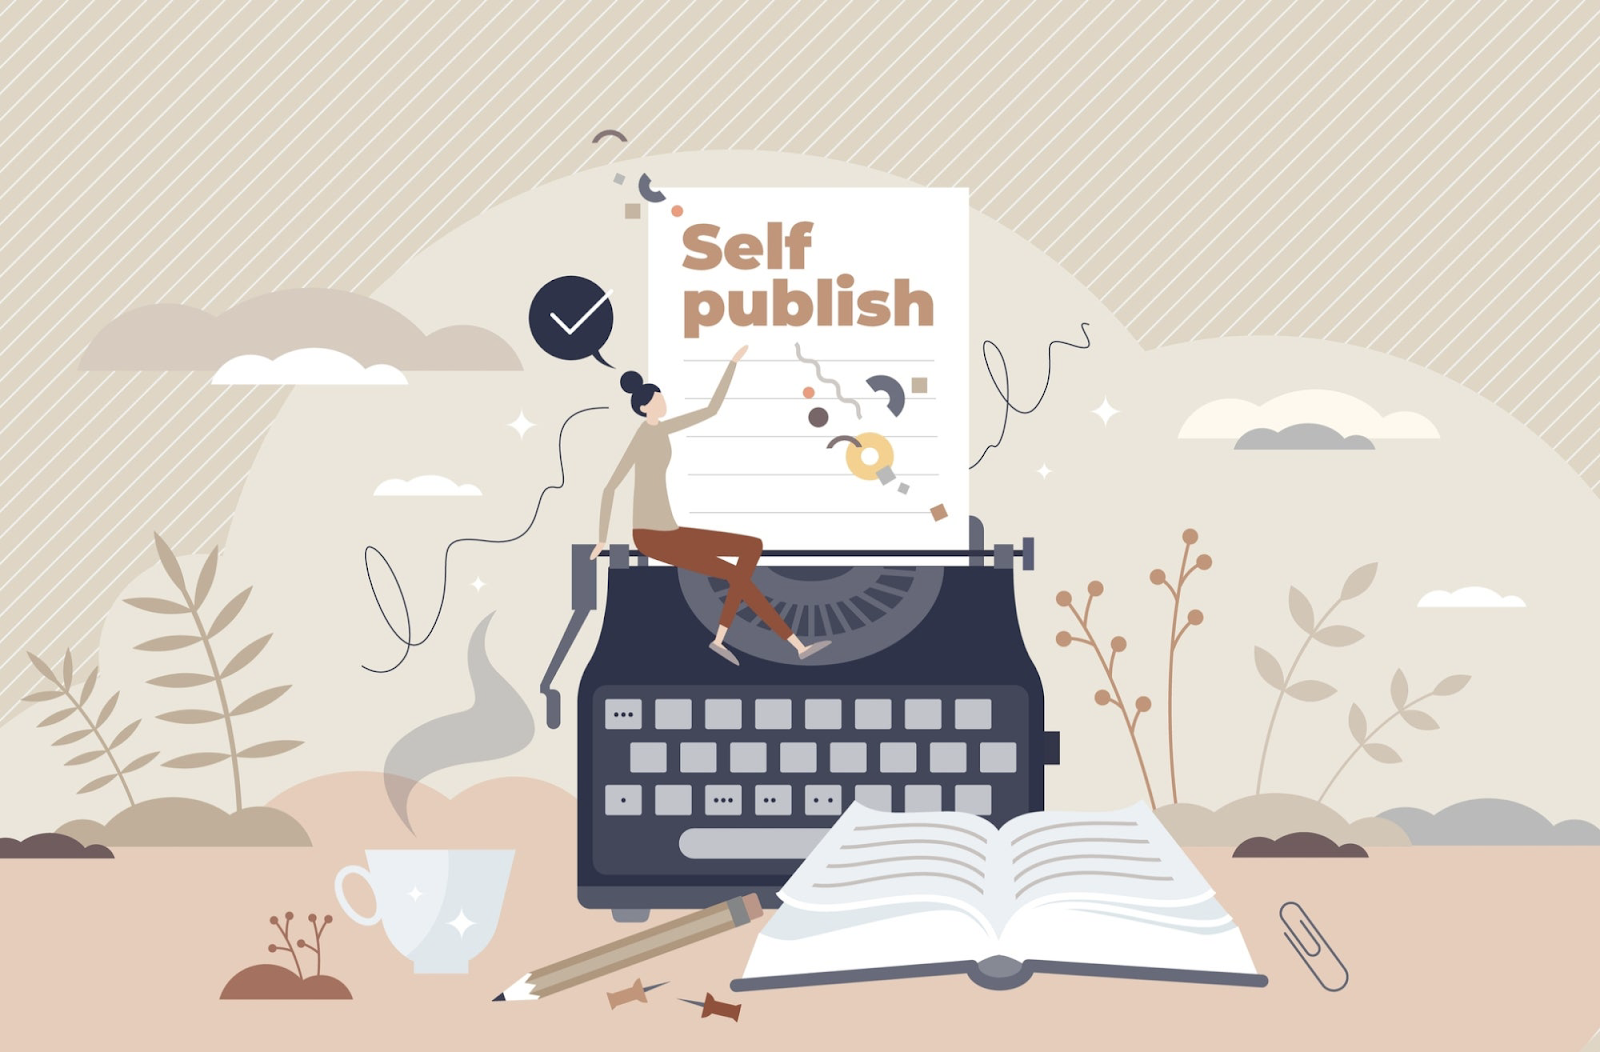 What Are the Main Perks of Self-Publishing on Amazon? 